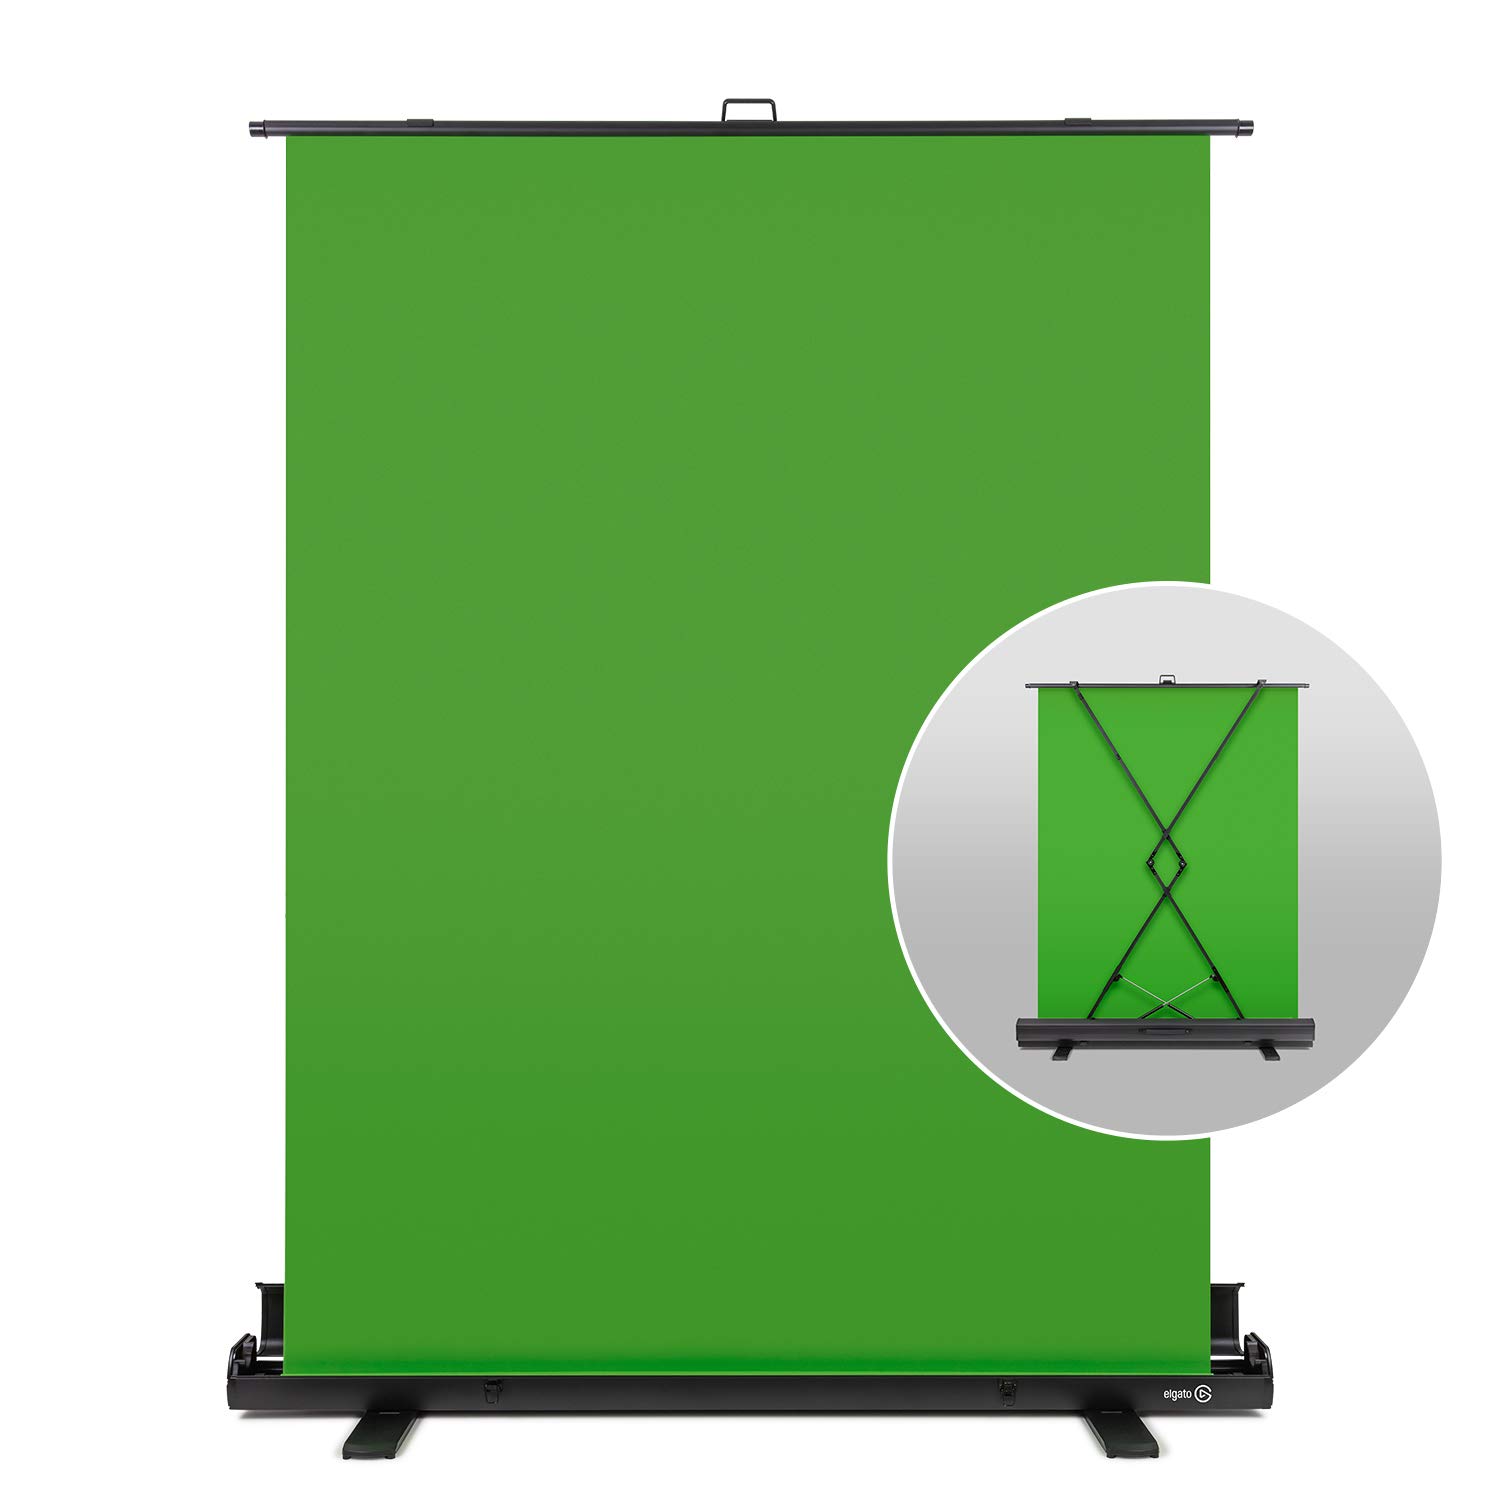 Want a professional-looking green screen for your video projects? The Elgato green screen is your solution! With a durable and wrinkle-free design, this portable green screen is perfect for content creators on the go. Click to buy yours today!